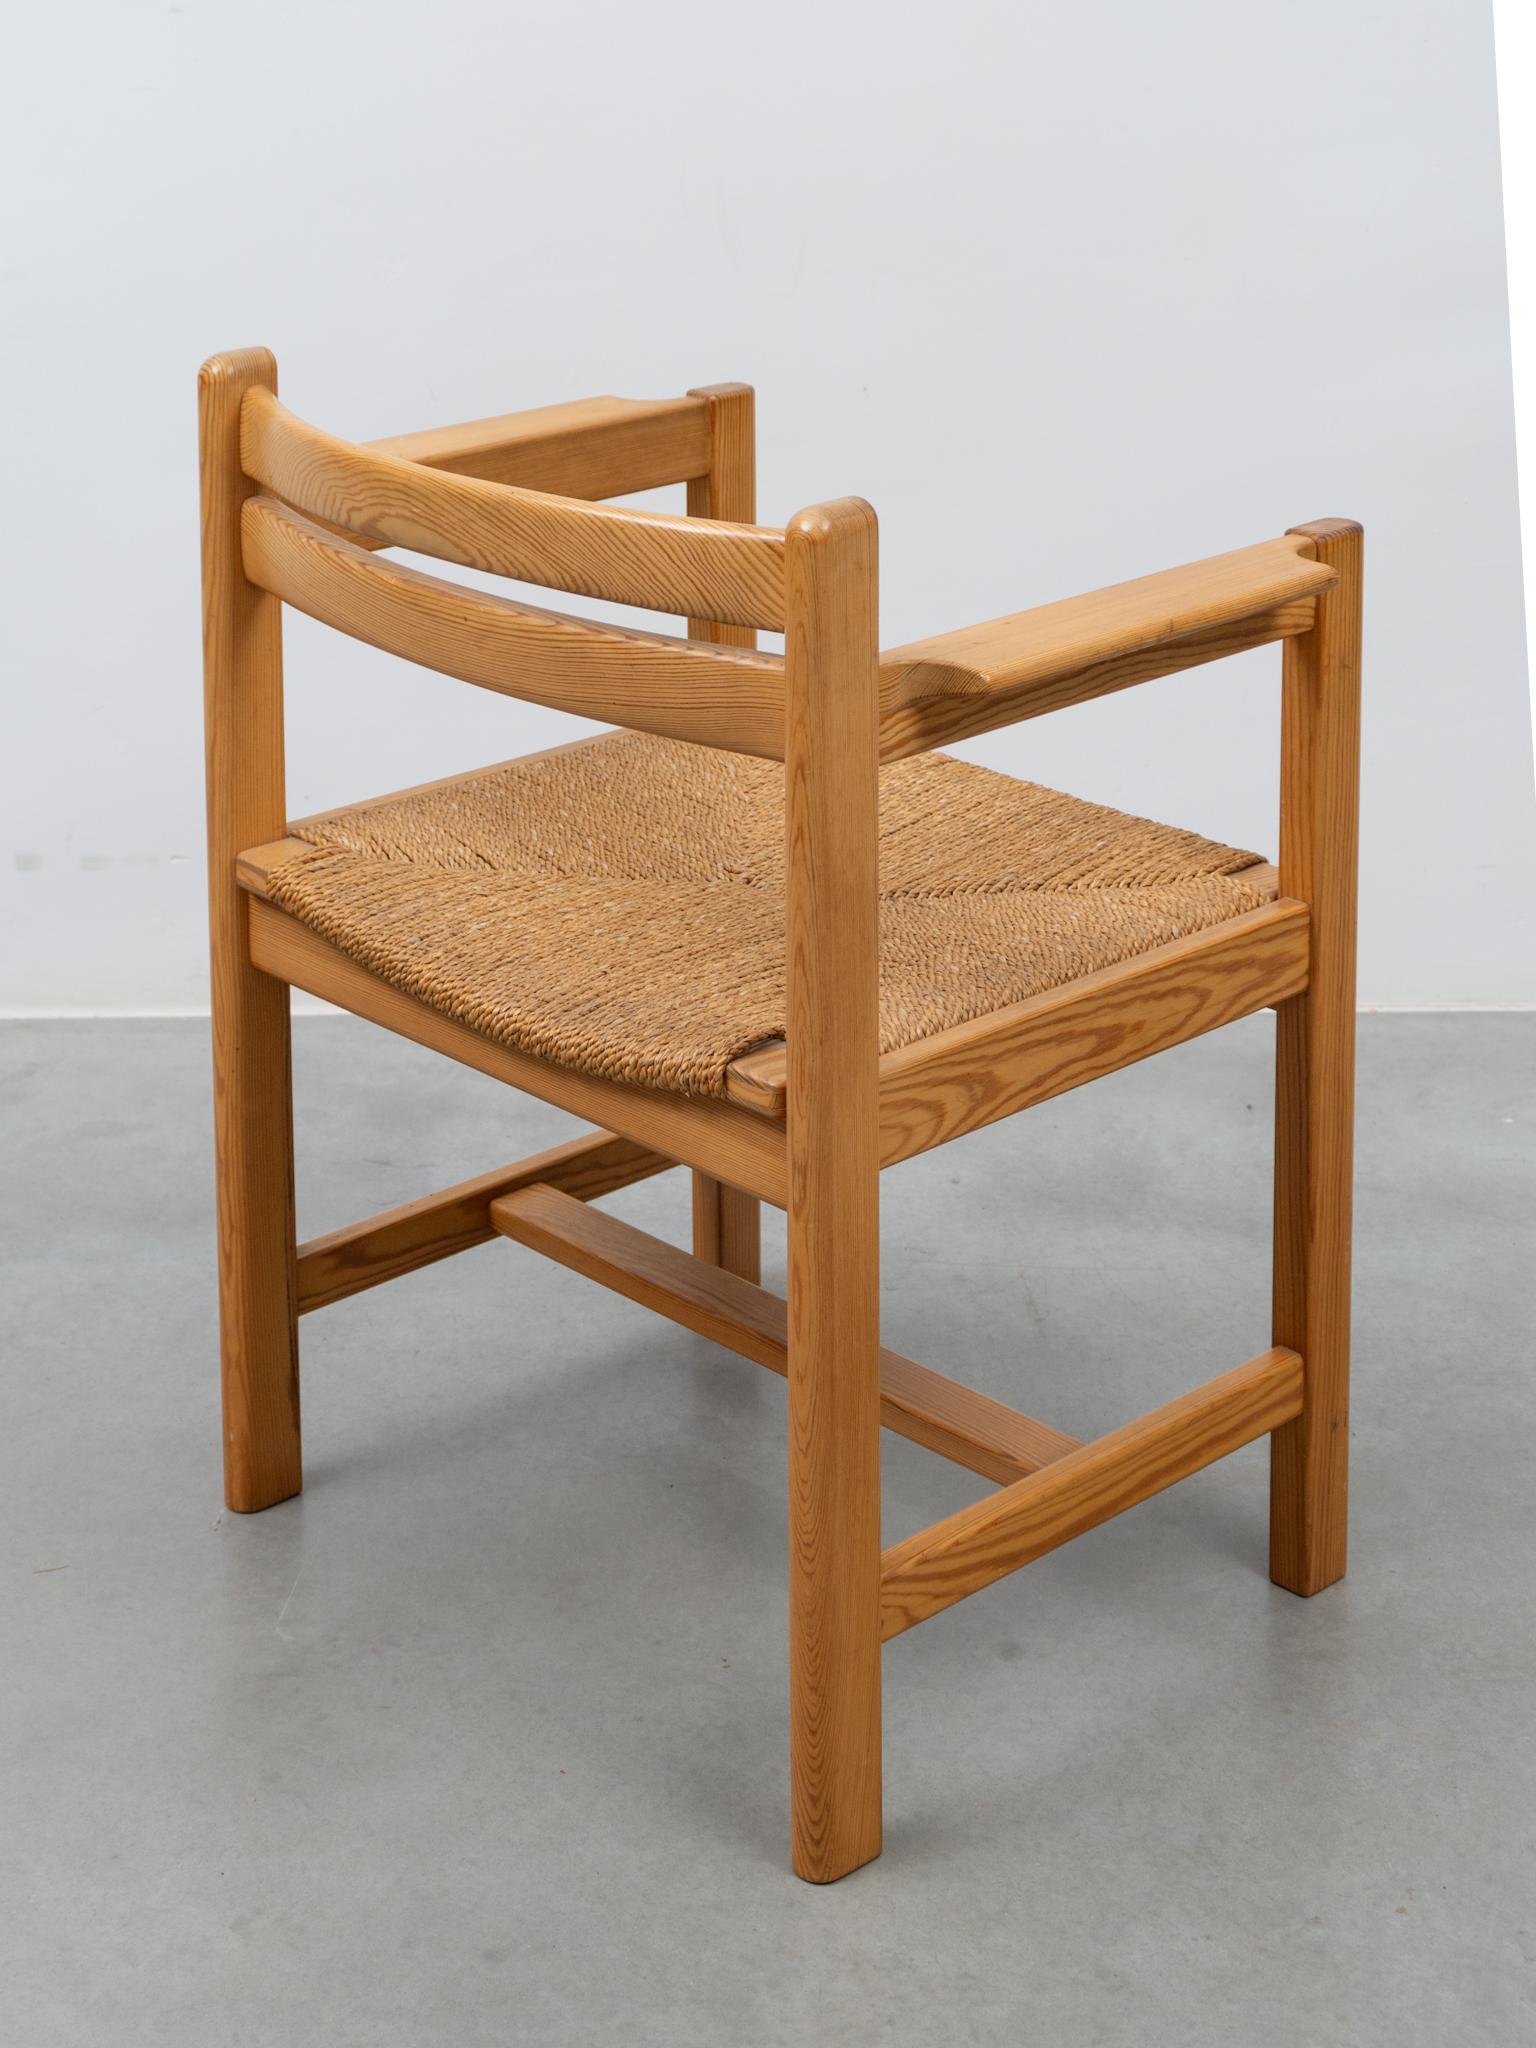 Eight Pine Arm Chairs by Børge Mogensen for AB Karl Andersson & Söner Sweden In Good Condition For Sale In Antwerp, BE